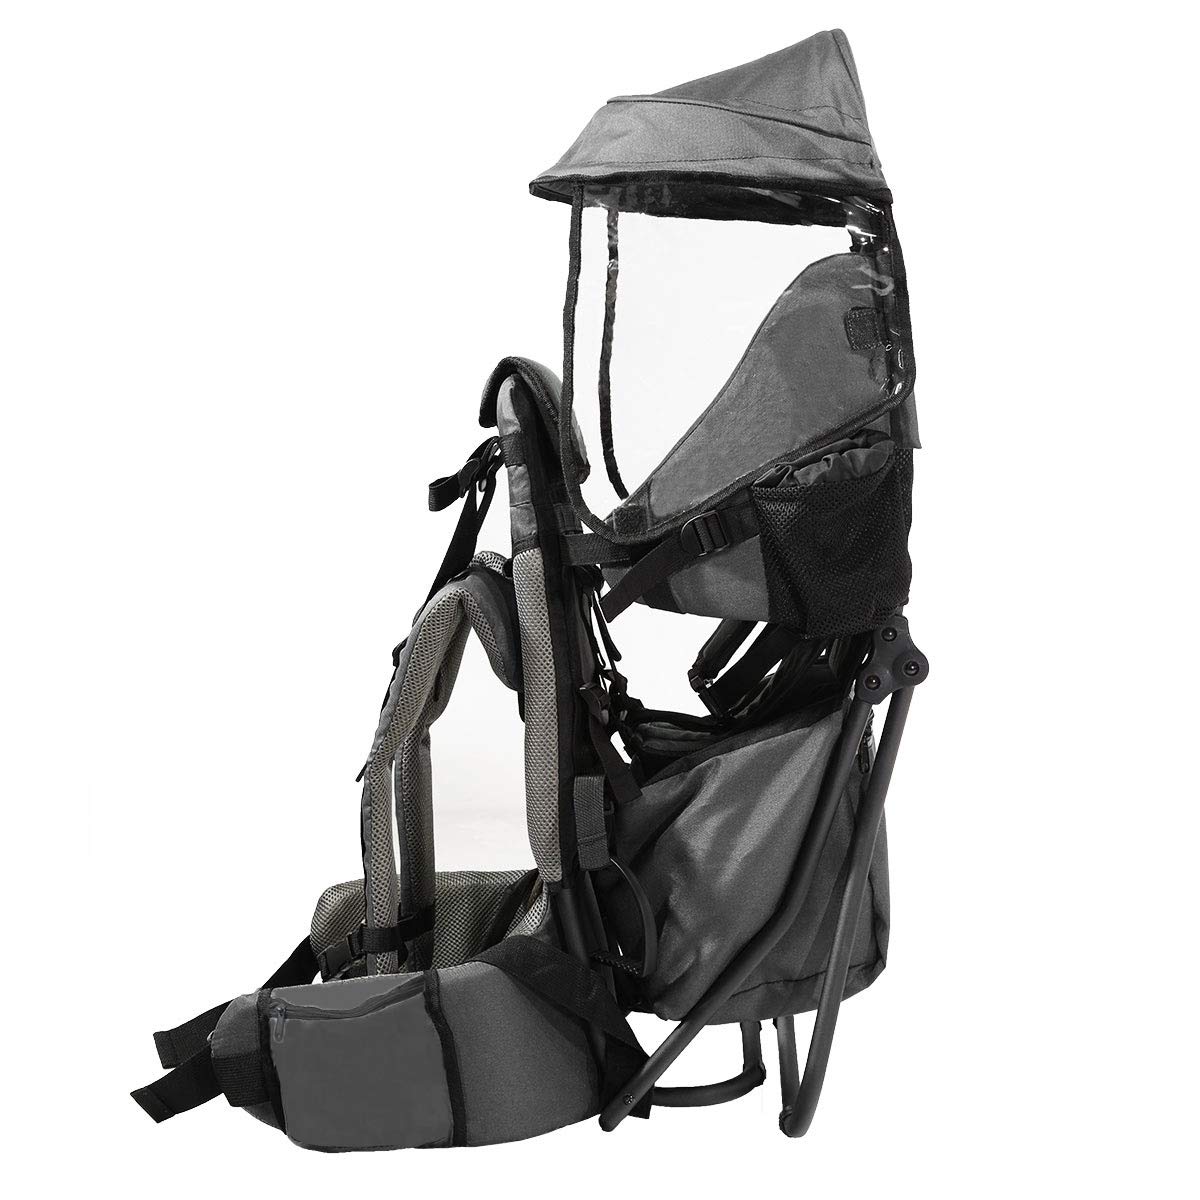 ClevrPlus Cross Country Baby Backpack Hiking Child Carrier Toddler Gray